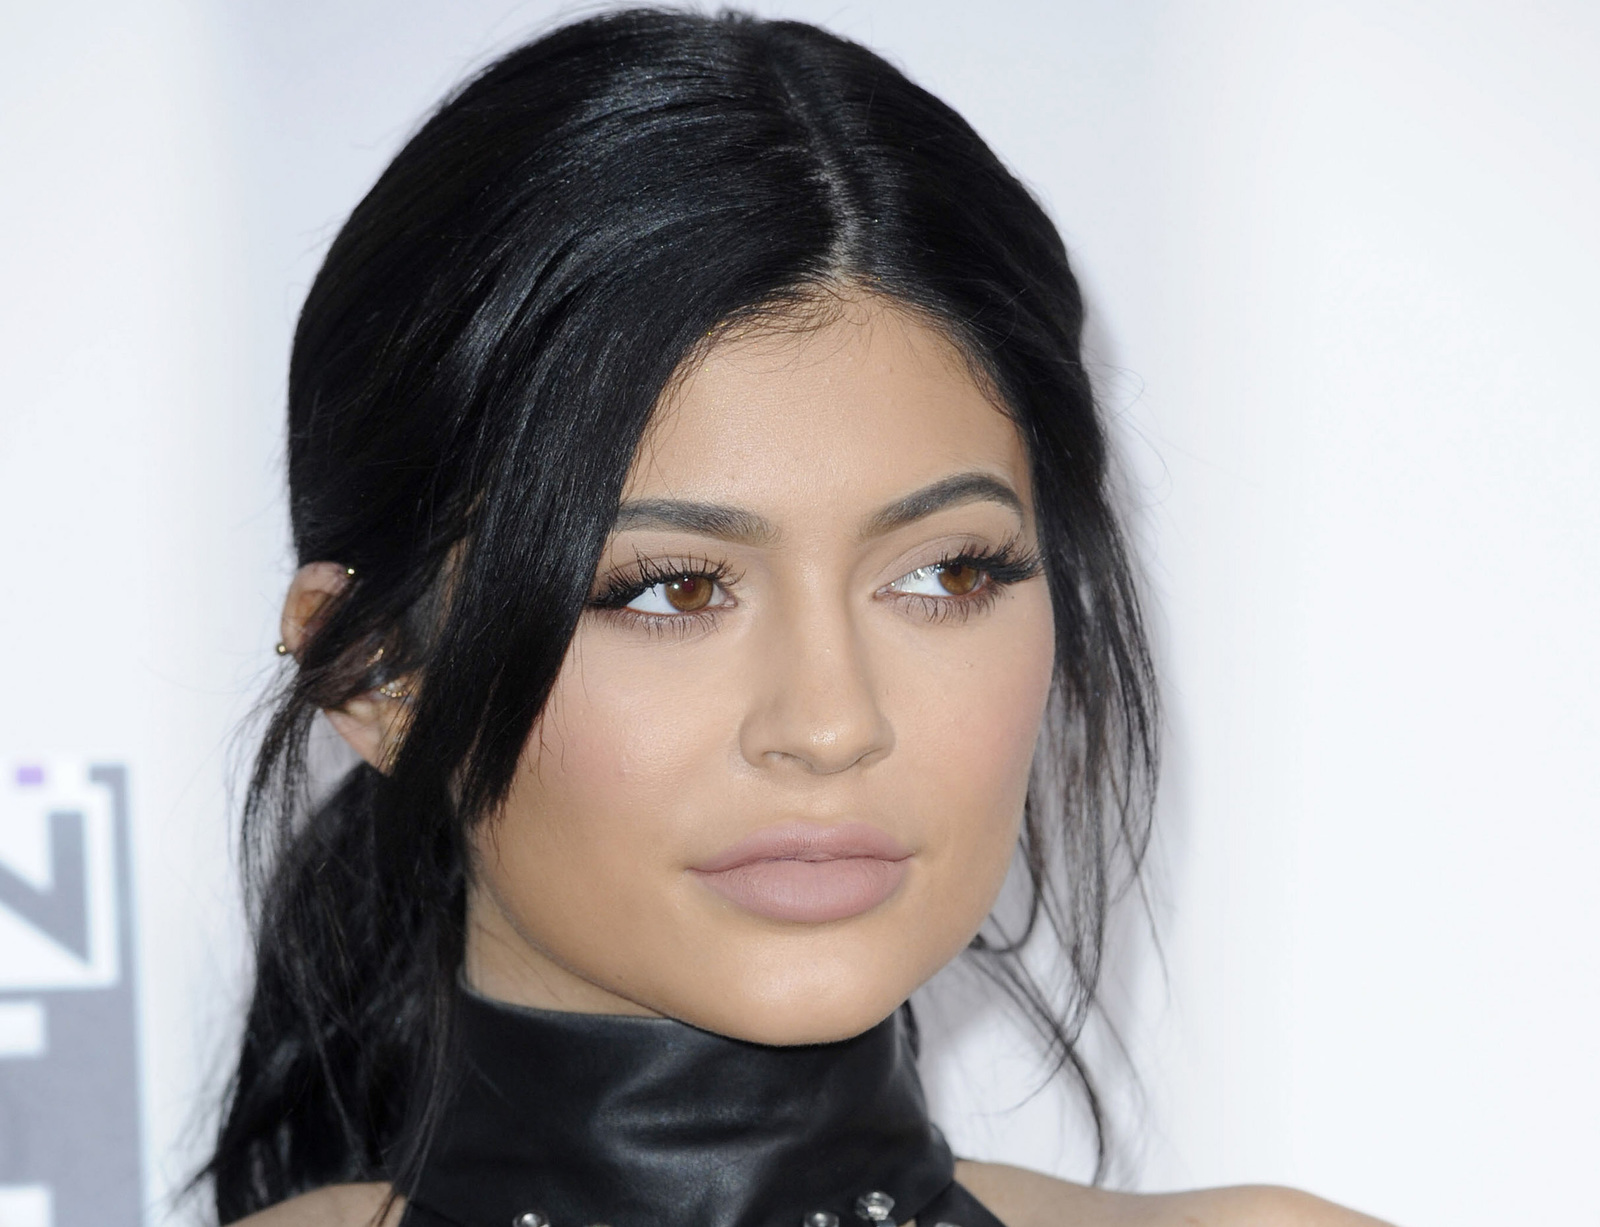 Patient wakes from dental surgery believing she's Kylie Jenner ...